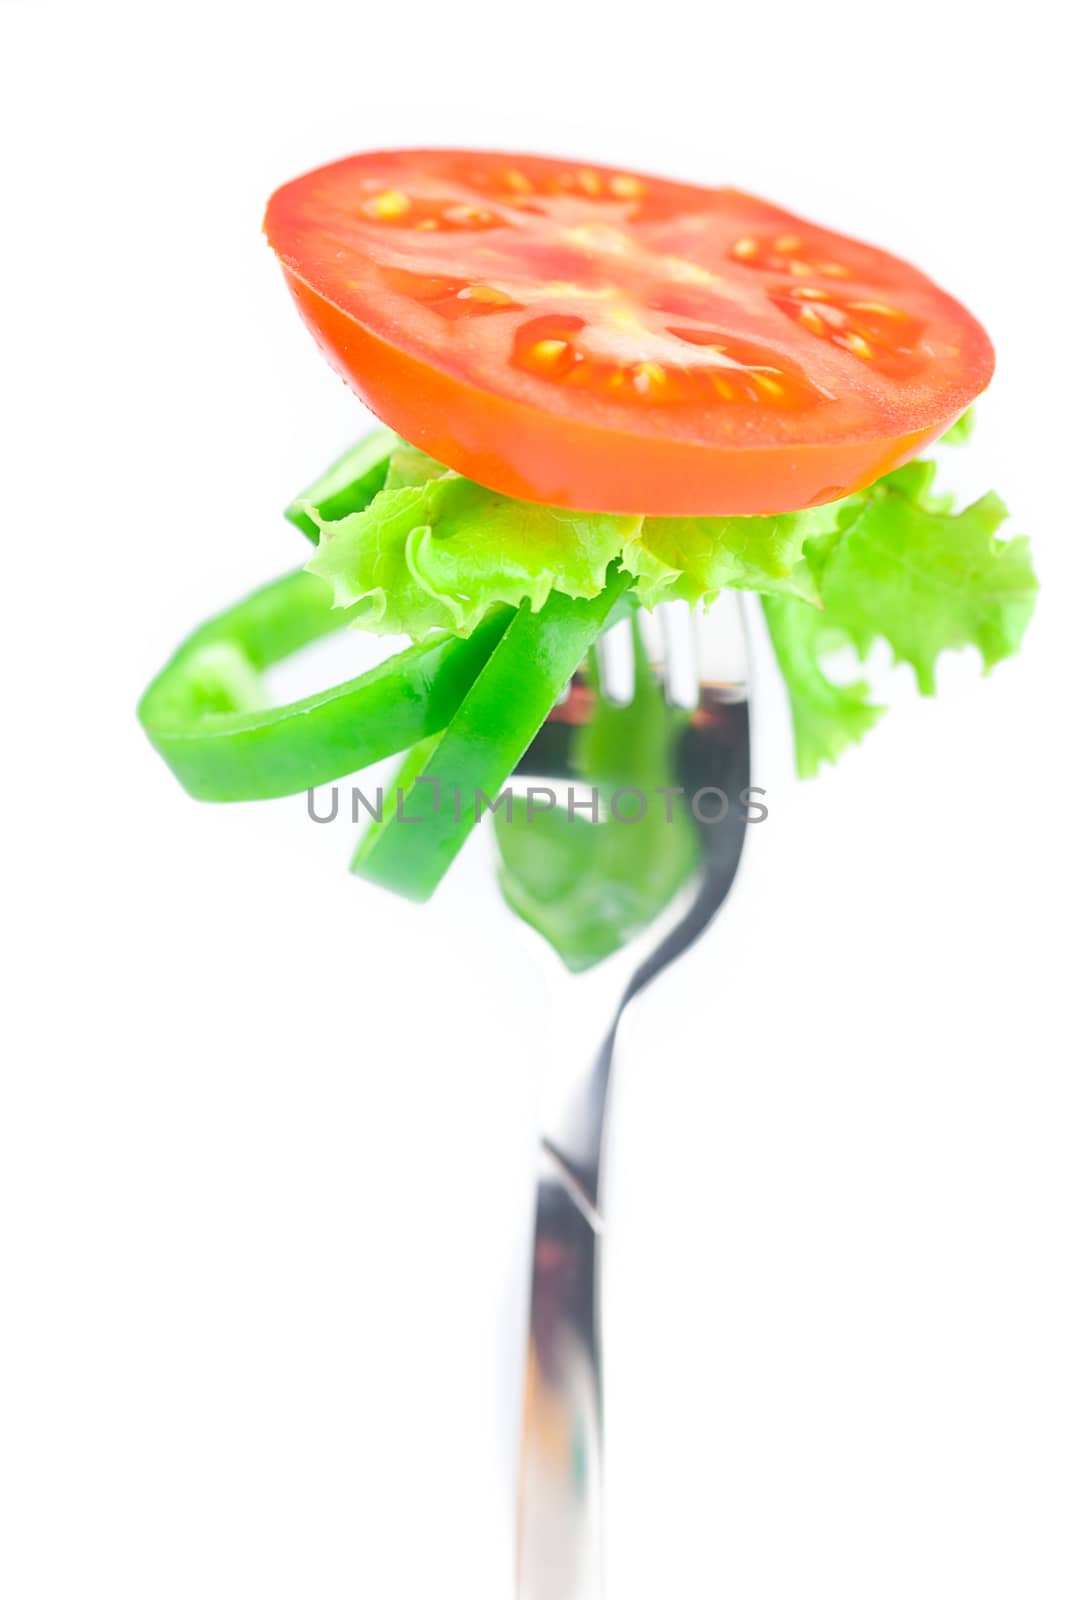 tomato ,lettuce,fork ,cucumber and pepper isolated on white by jannyjus